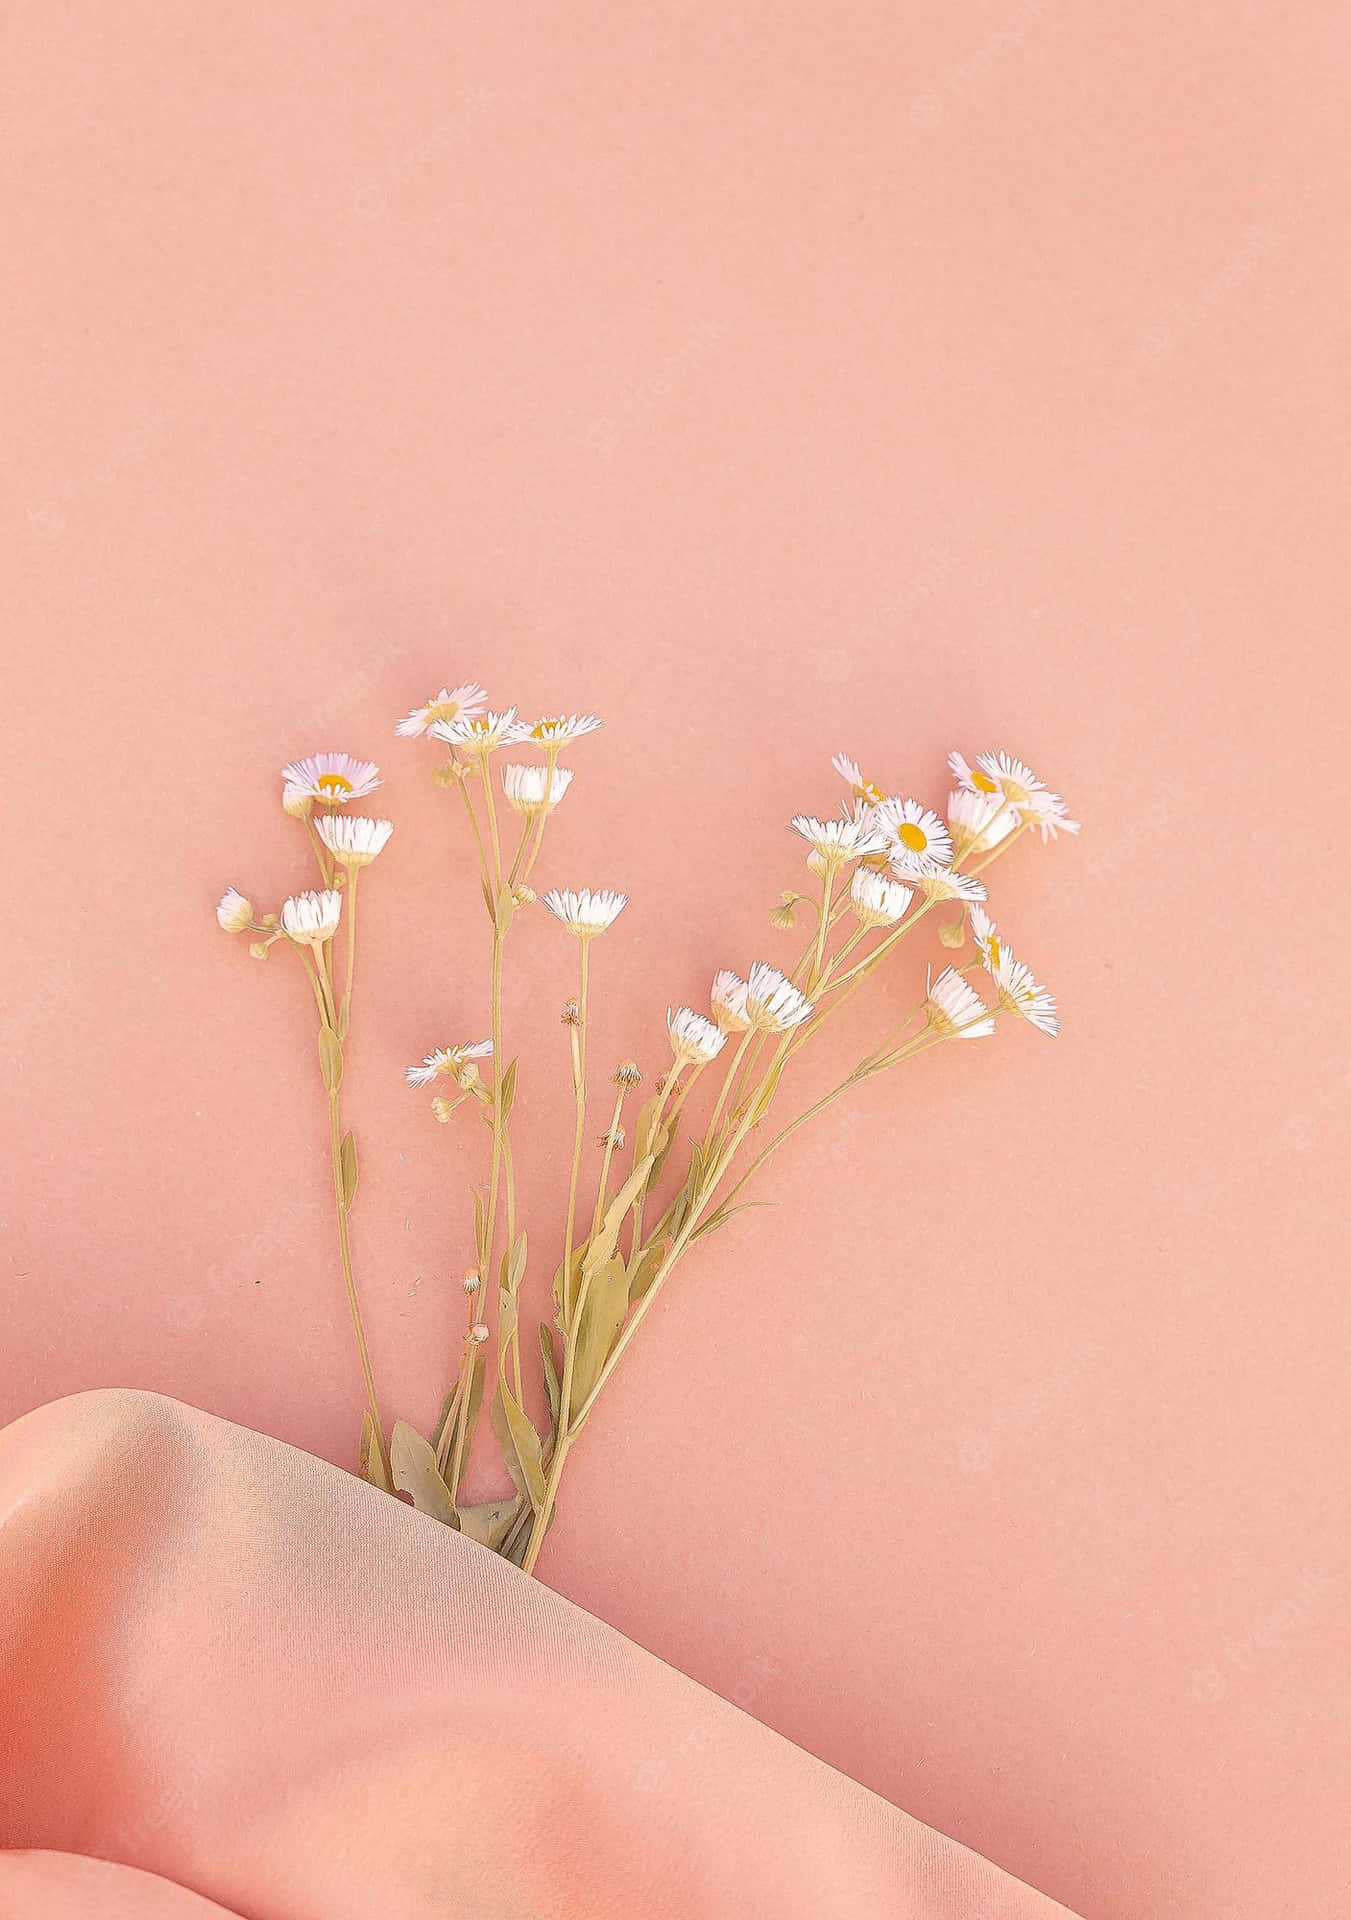 Tiny Daisy Flowers Pink Aesthetic Background